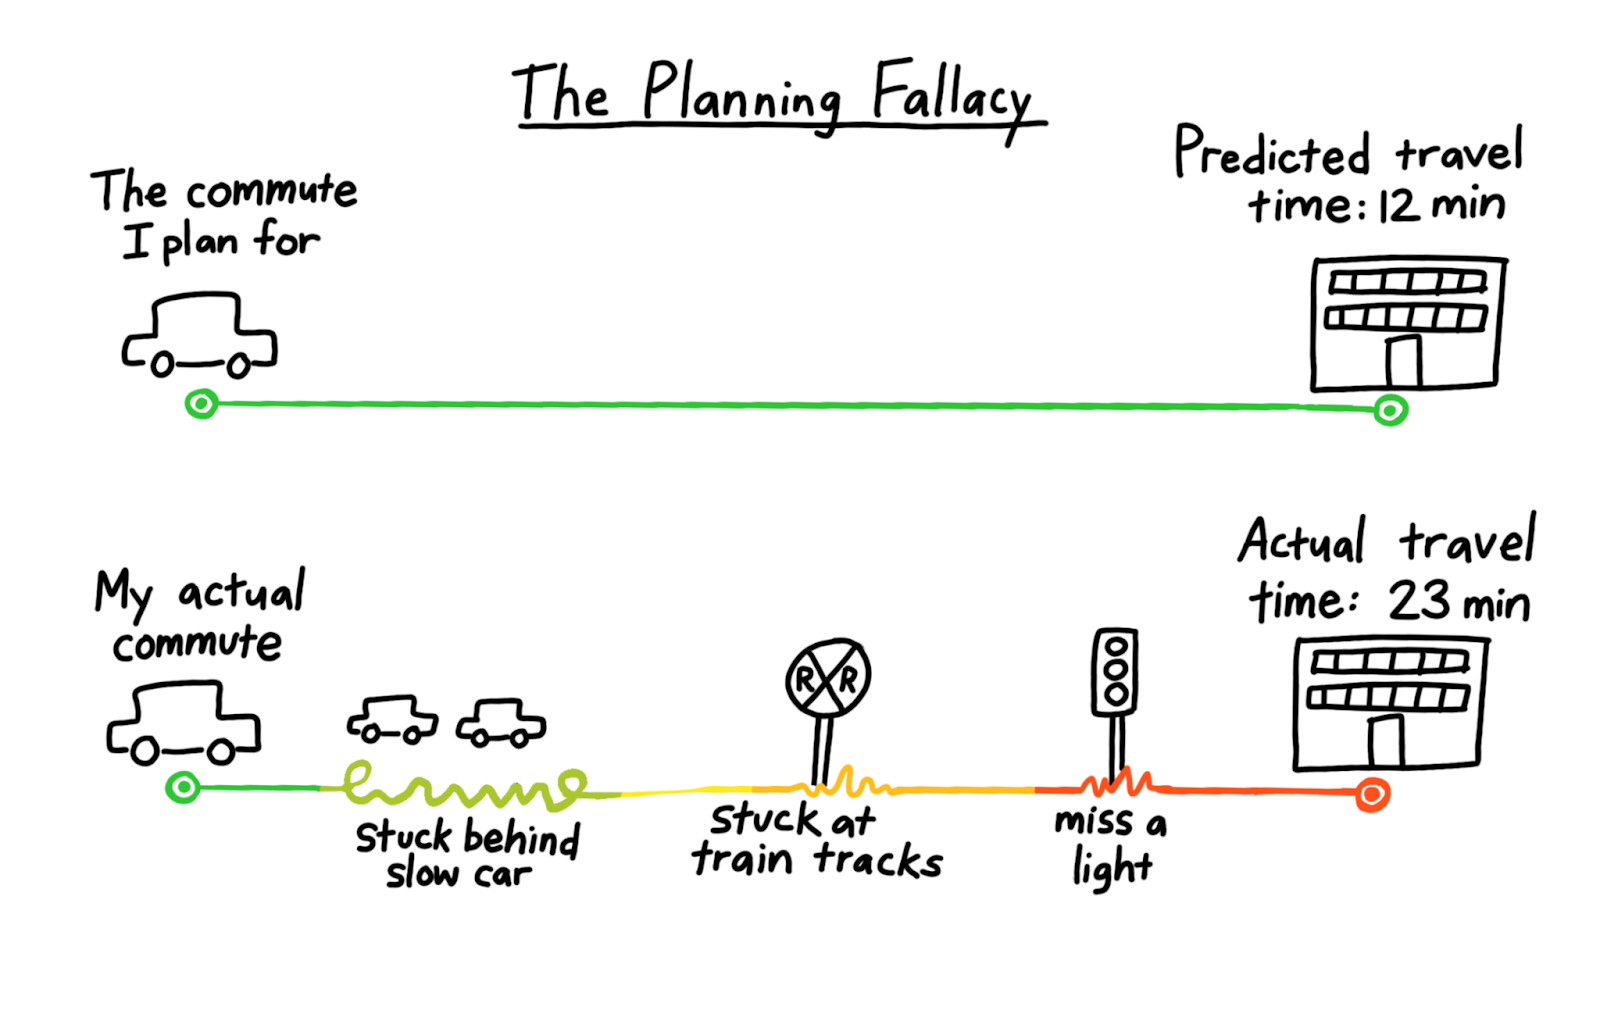 An illustration that shows an example of a planning fallacy.